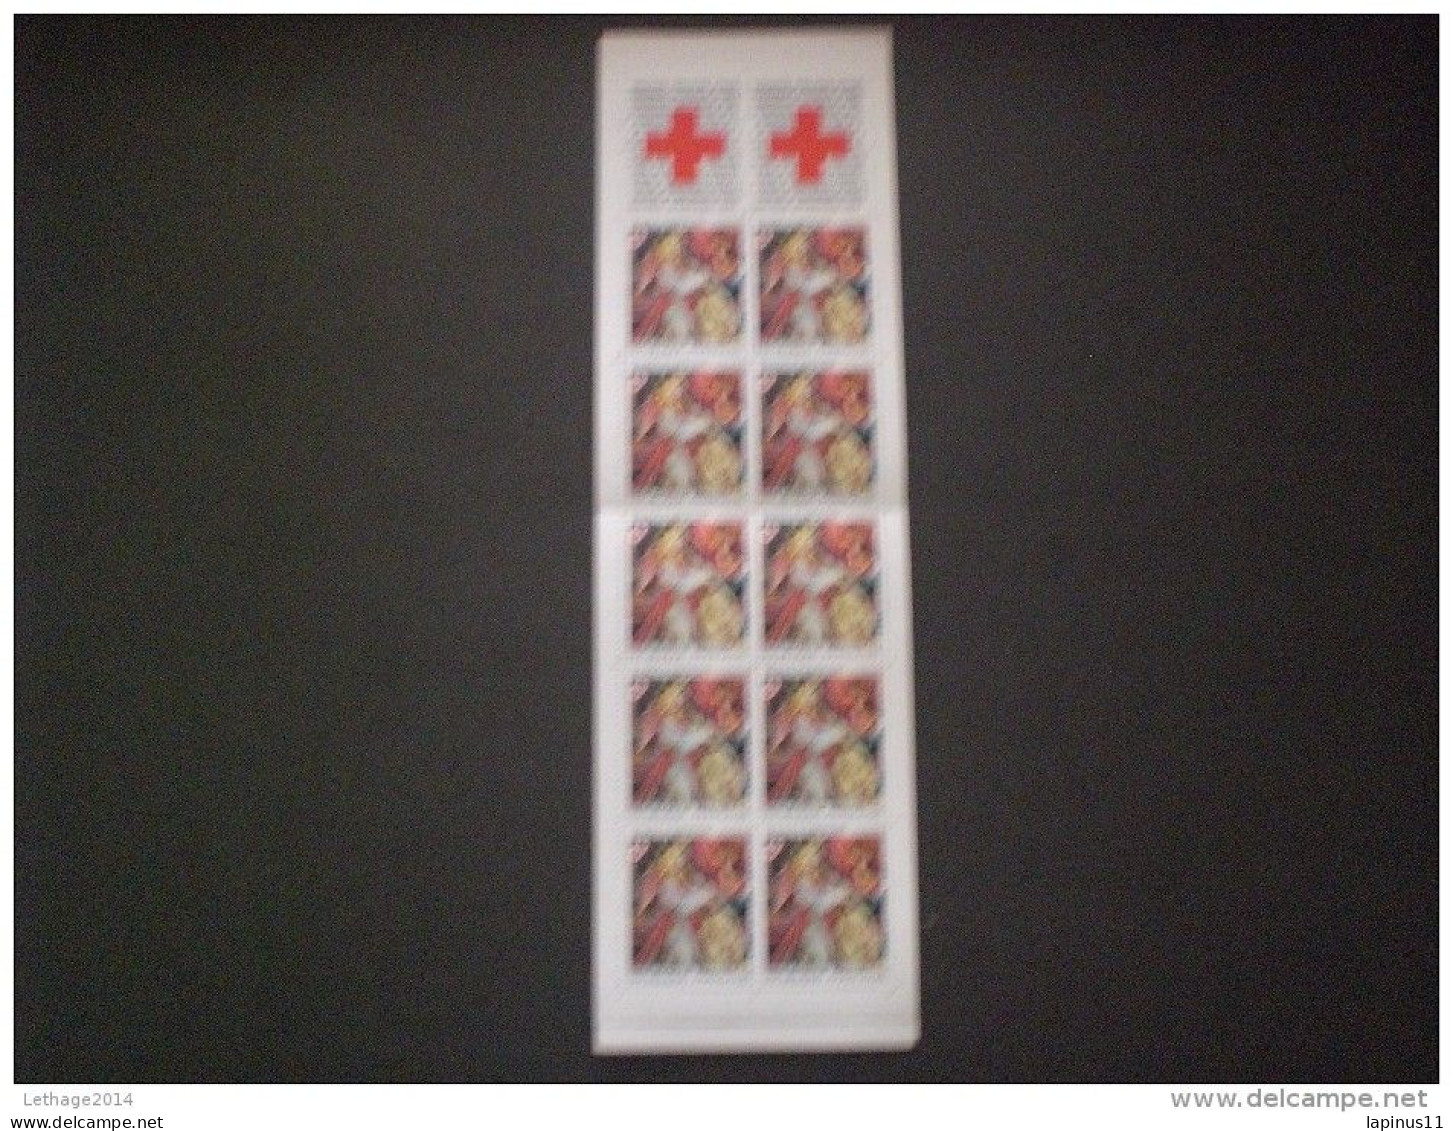 STAMPS FRANCE CARNETS 1985 RED CROSS - Personnages